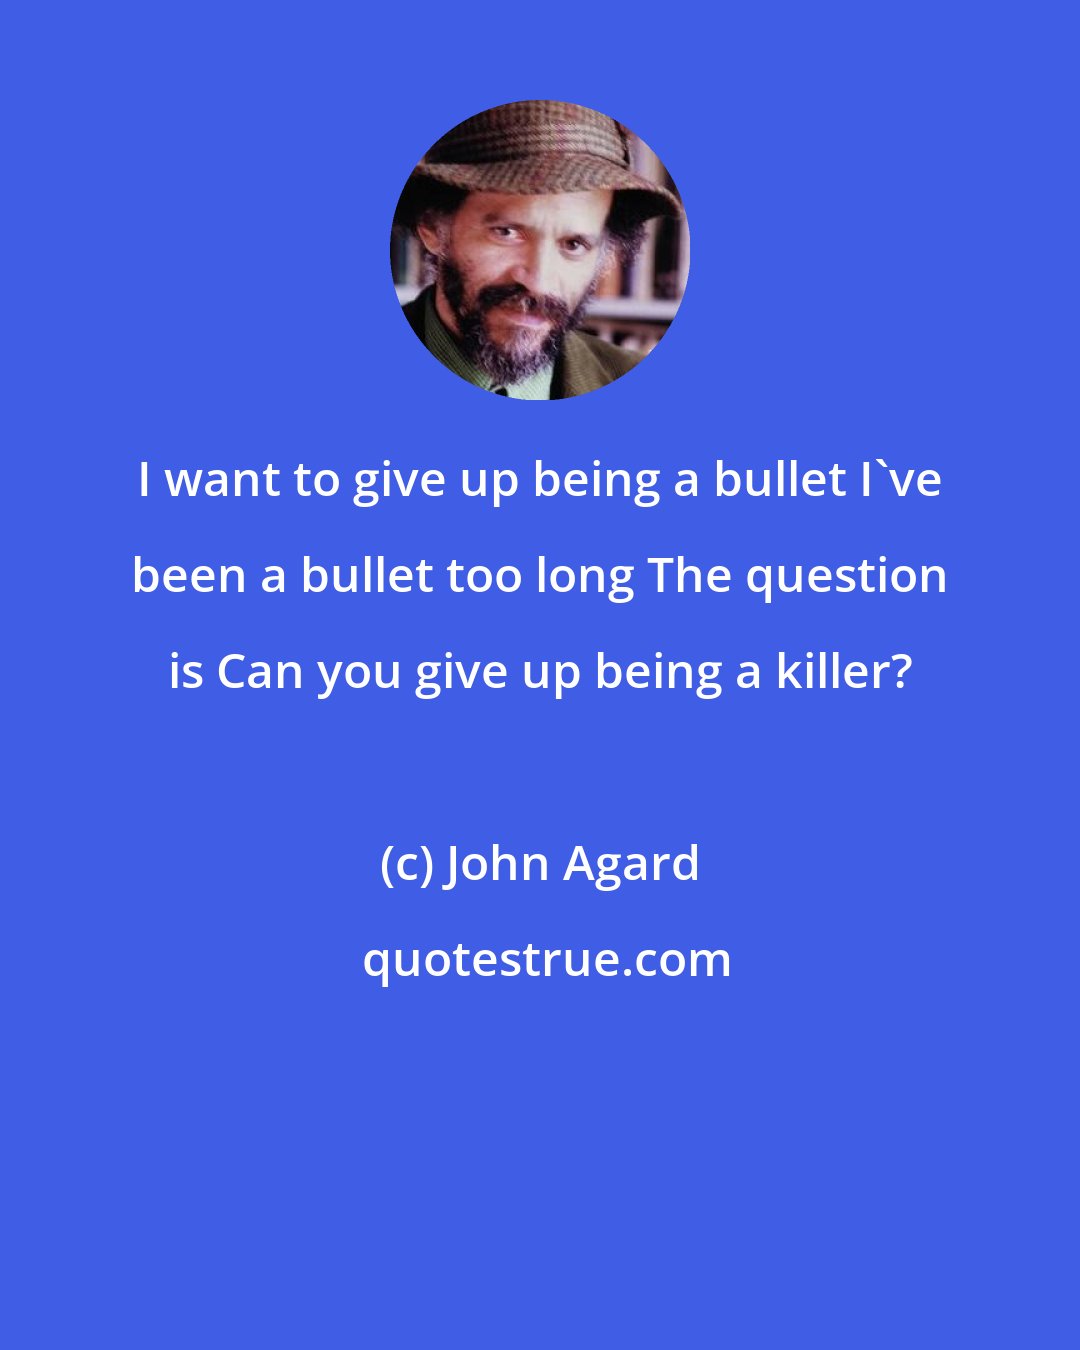 John Agard: I want to give up being a bullet I've been a bullet too long The question is Can you give up being a killer?